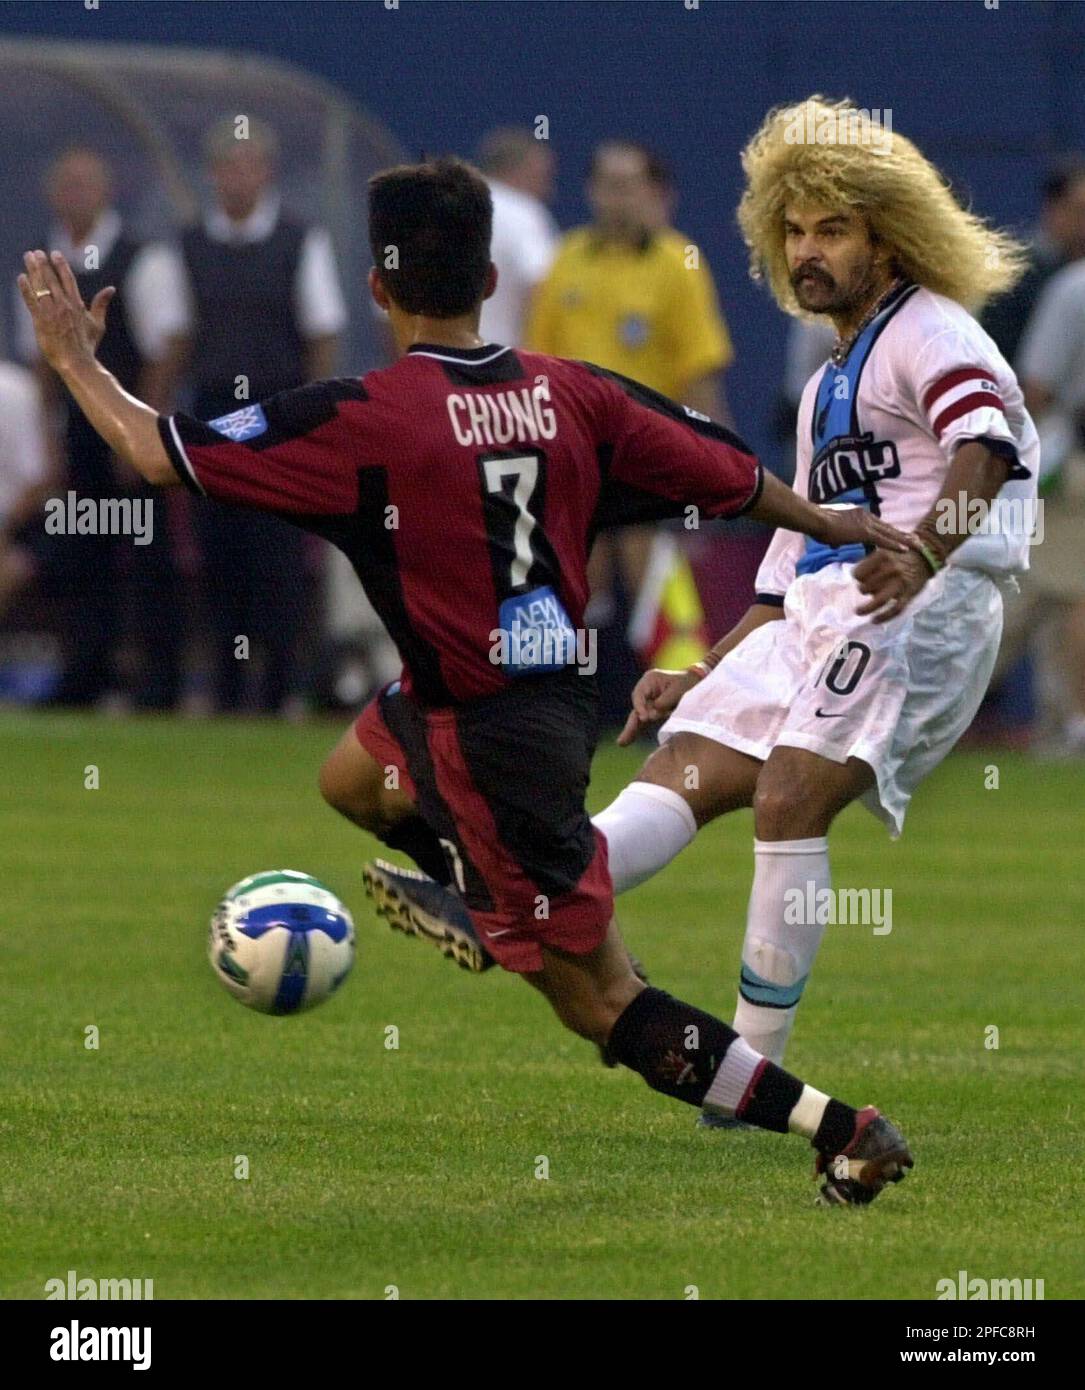 Tampa Bay Mutiny midfielder Carlos Valderrama, right, passes the ball past  New York/New Jersey MetroStars midfielder Mark Chung during the first half  Friday, June 9, 2000, at Giants Stadium in East Rutherford,